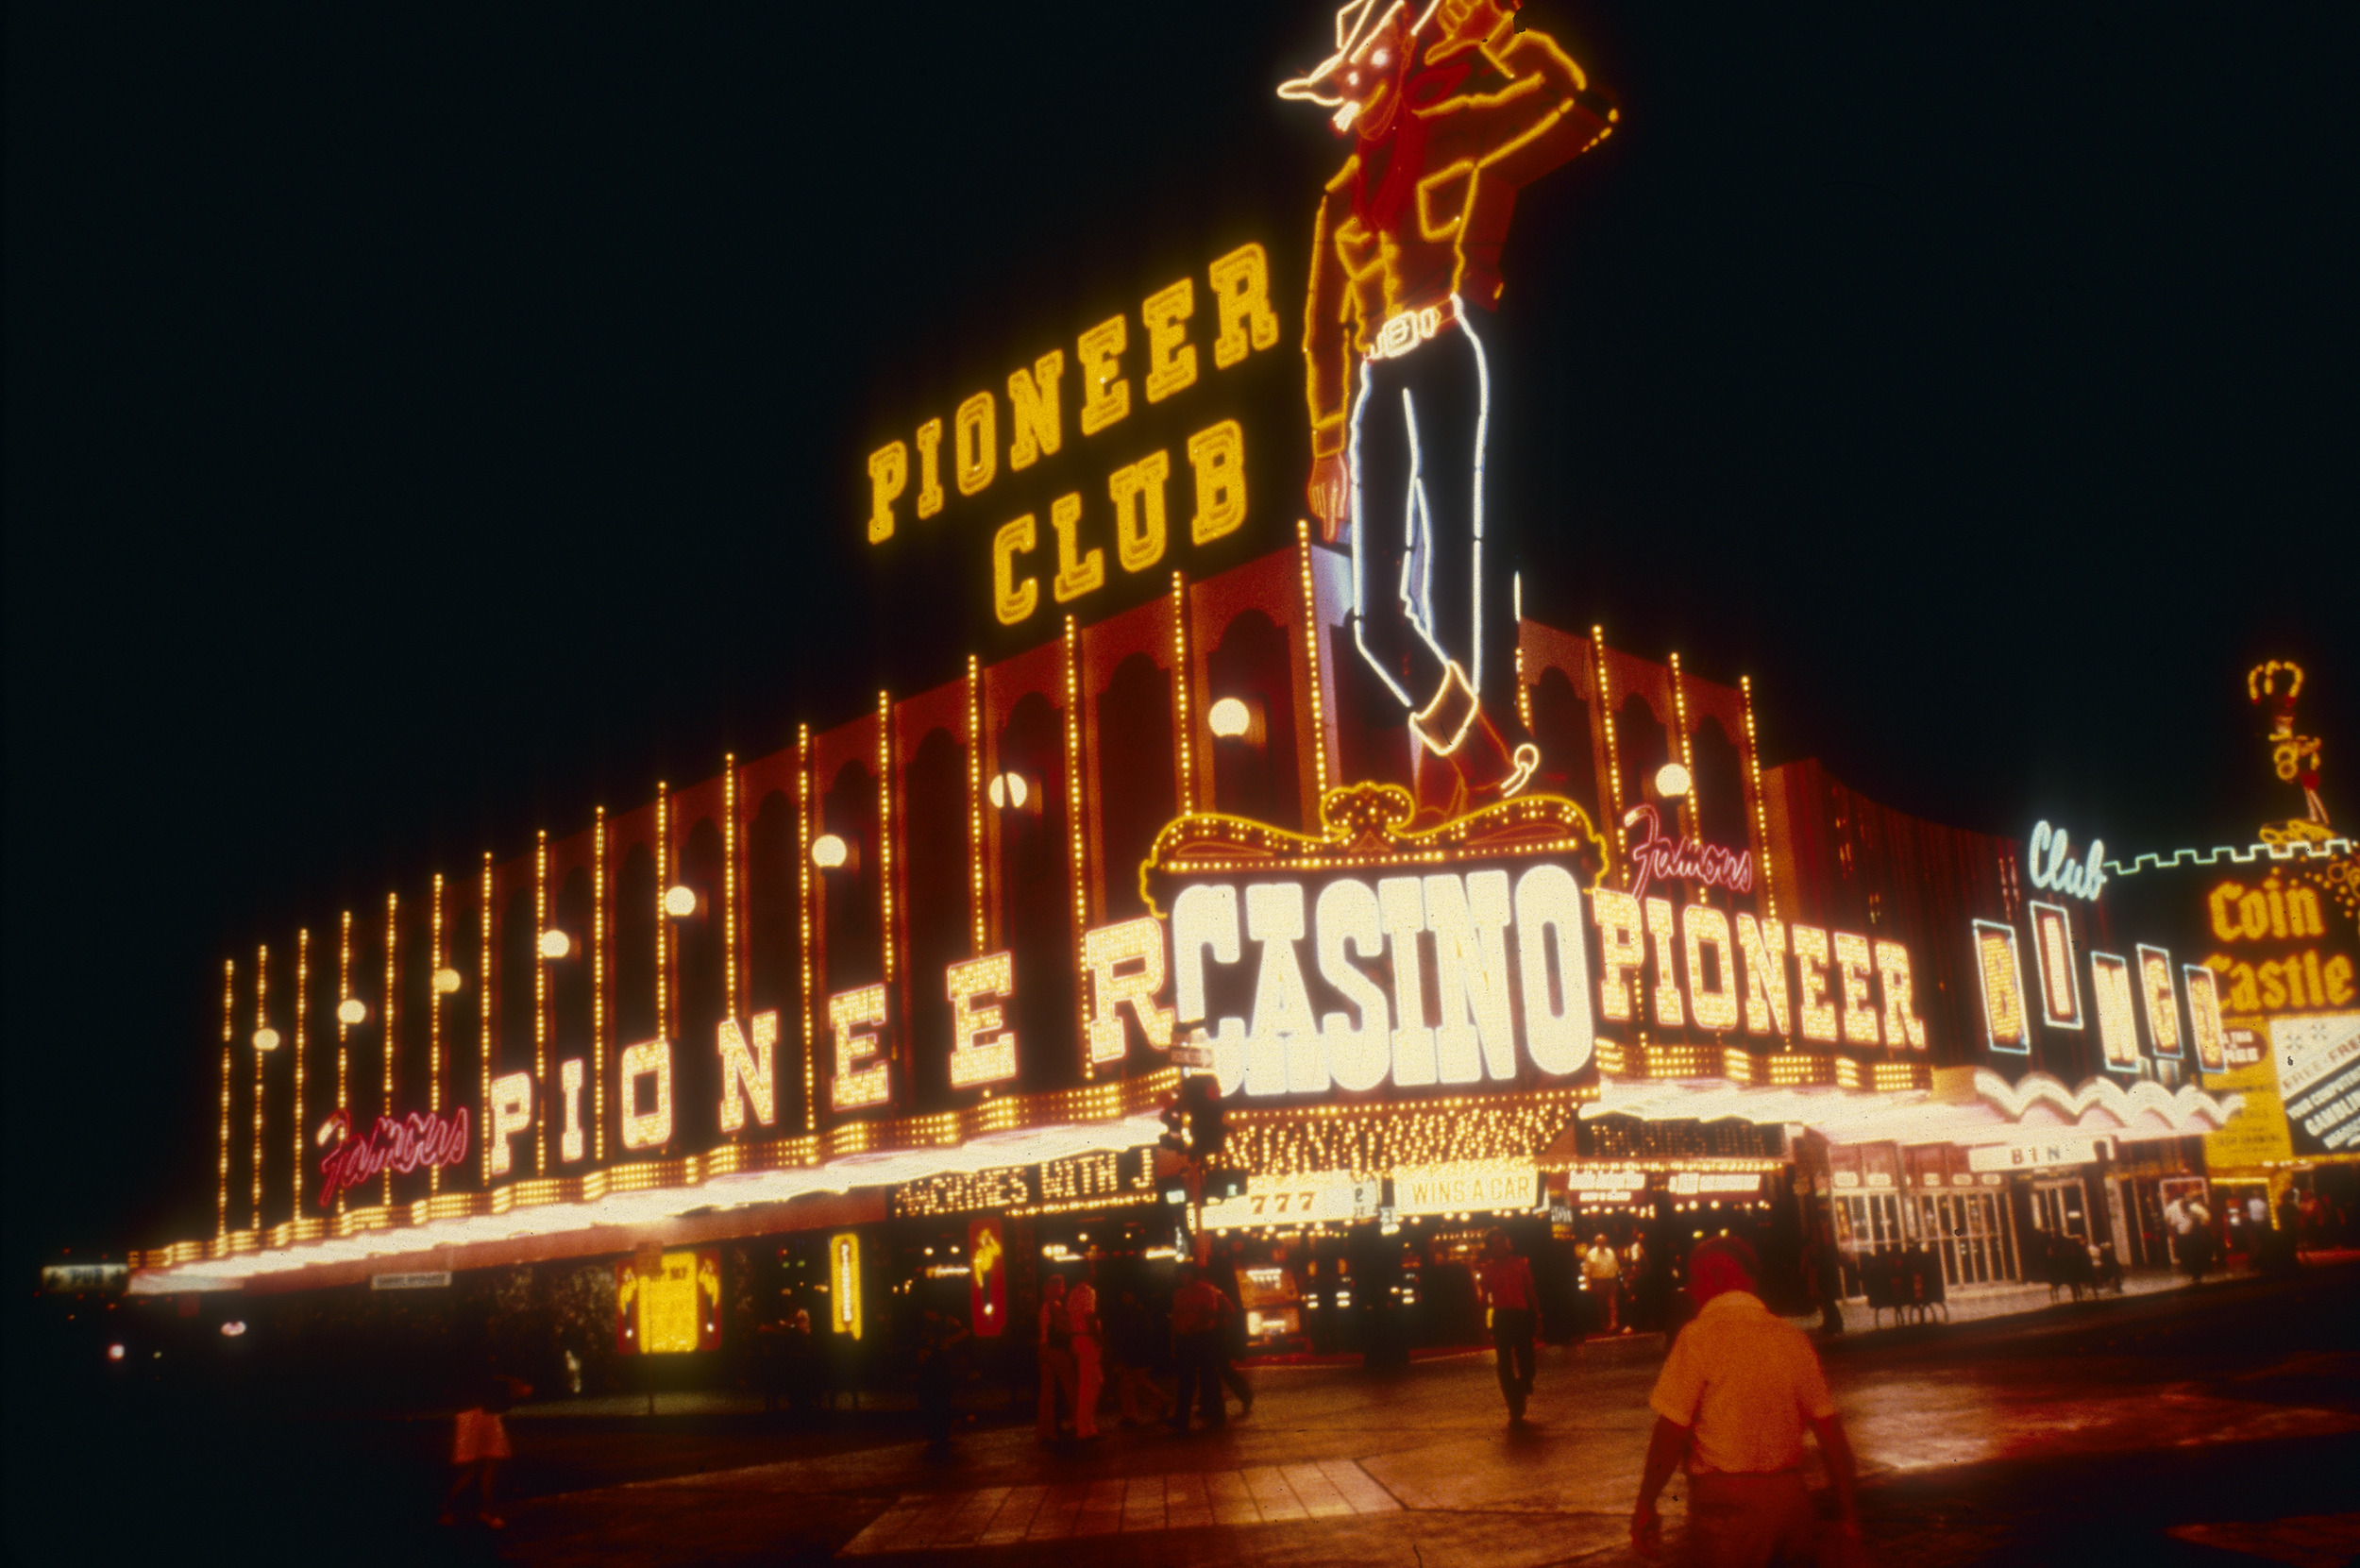 Slide of the Pioneer Club and its neon signs, including Vegas Vic, Las Vegas, circa 1980s